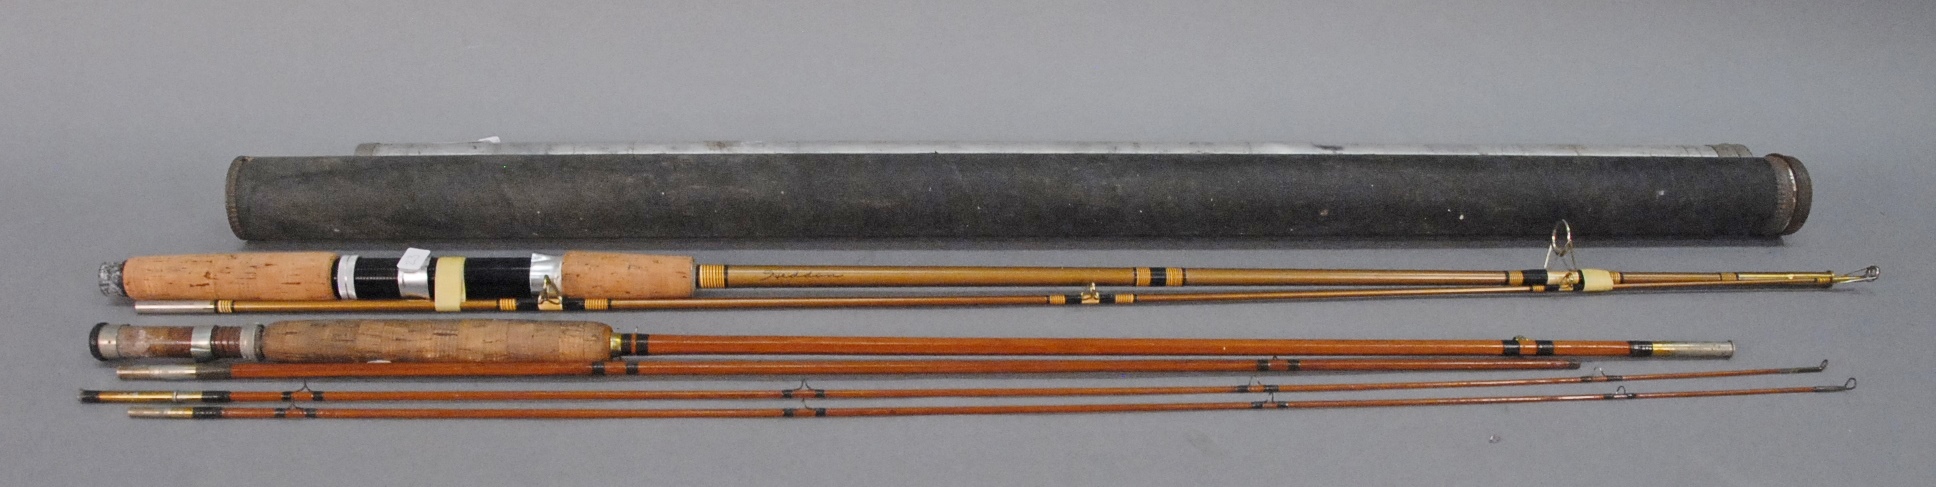 Lot 23: Two Heddon Rods including vintage Heddon #10 bamboo fly rod three  part rod center part as is along with a Heddon spinning rod. - Nadeau's  Auction Gallery